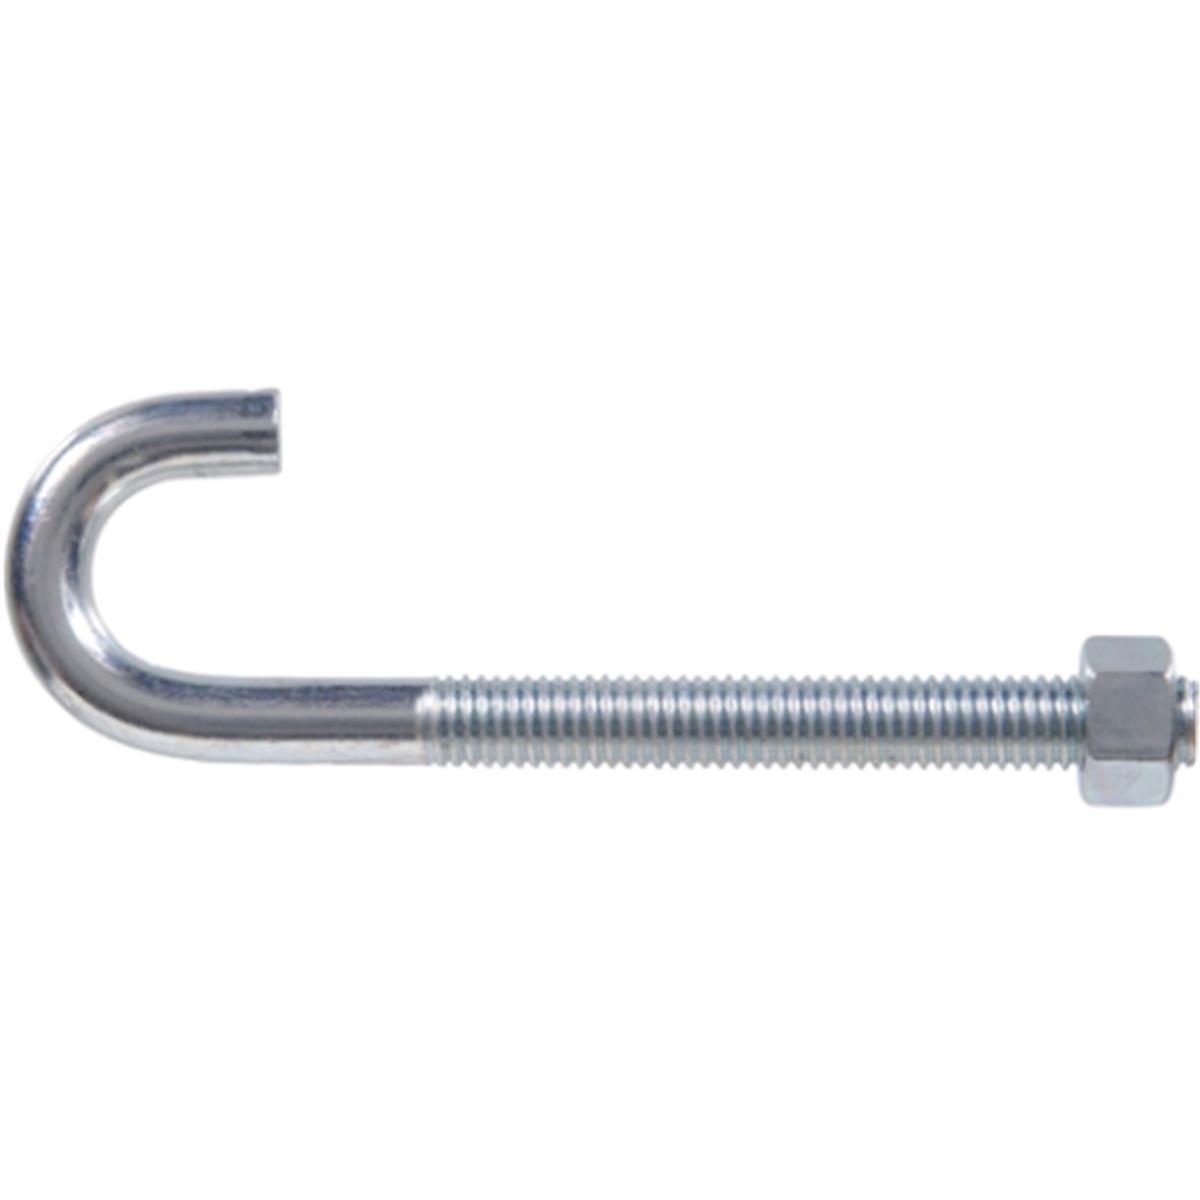 0.37-16 X 7 In. Zinc Plated J-bolt With Nut, Pack Of 10